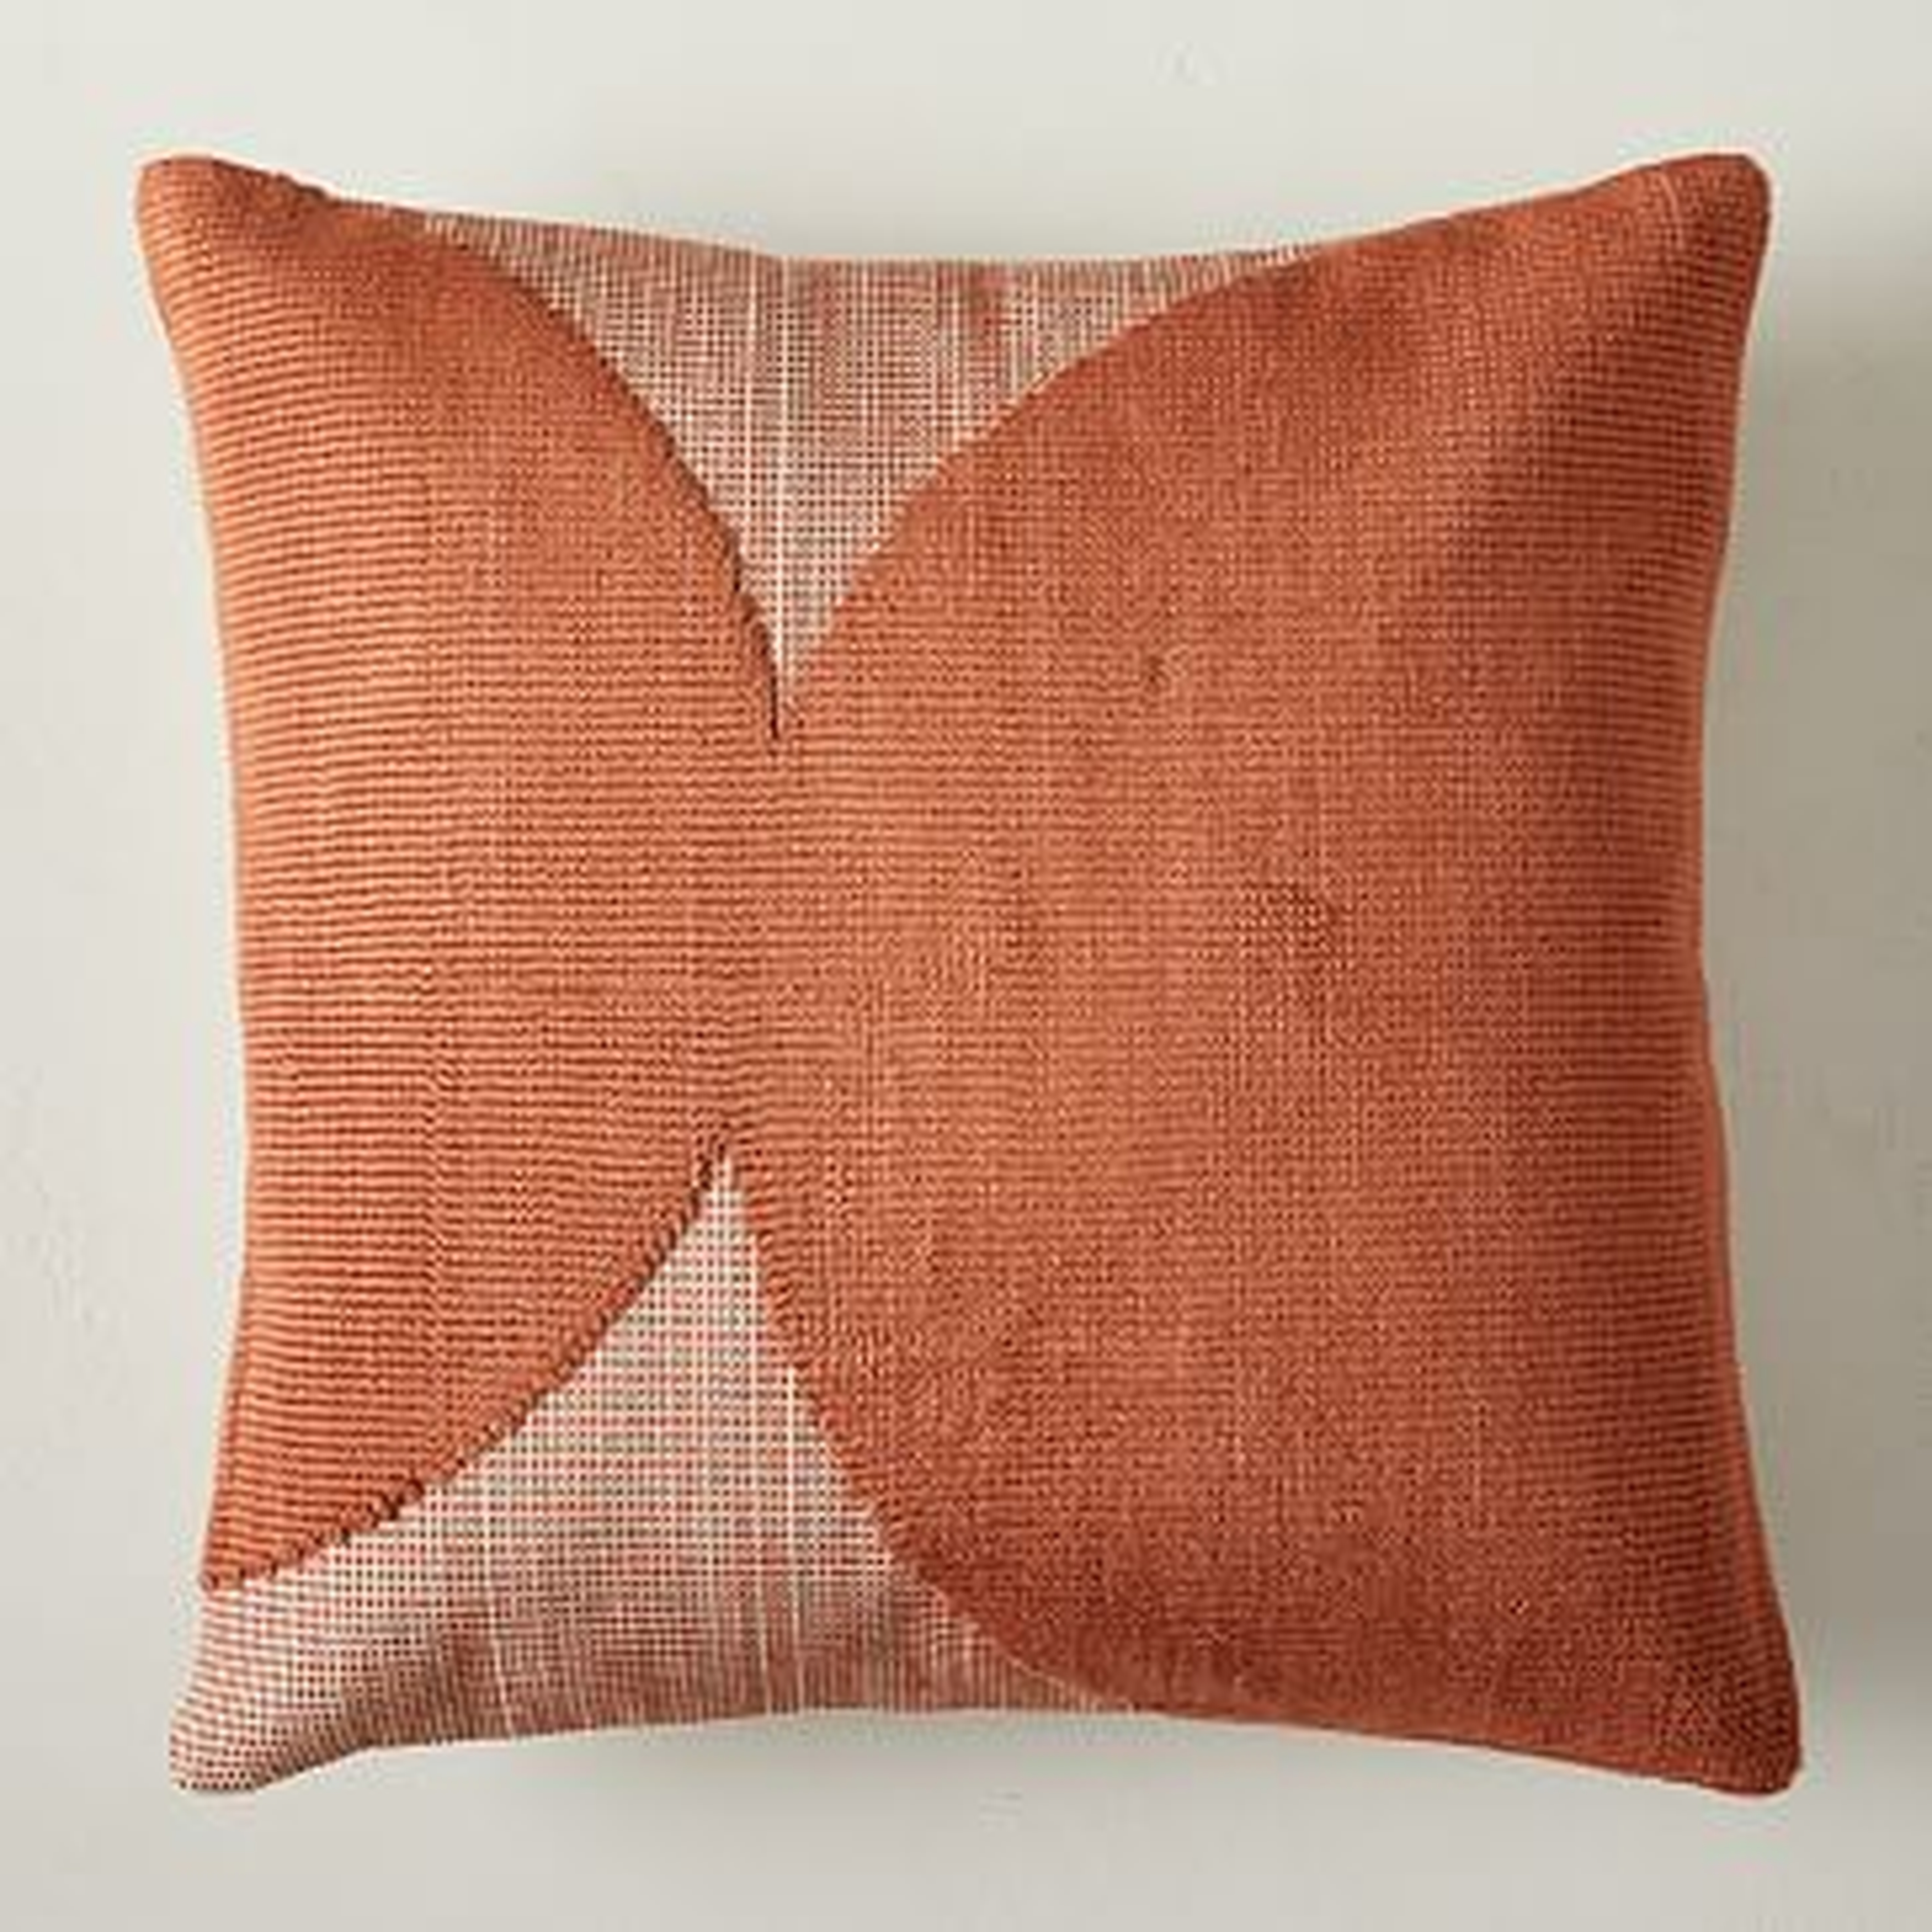 Loomed Loops Pillow Cover, Copper, 20x20, Set of 2 - West Elm